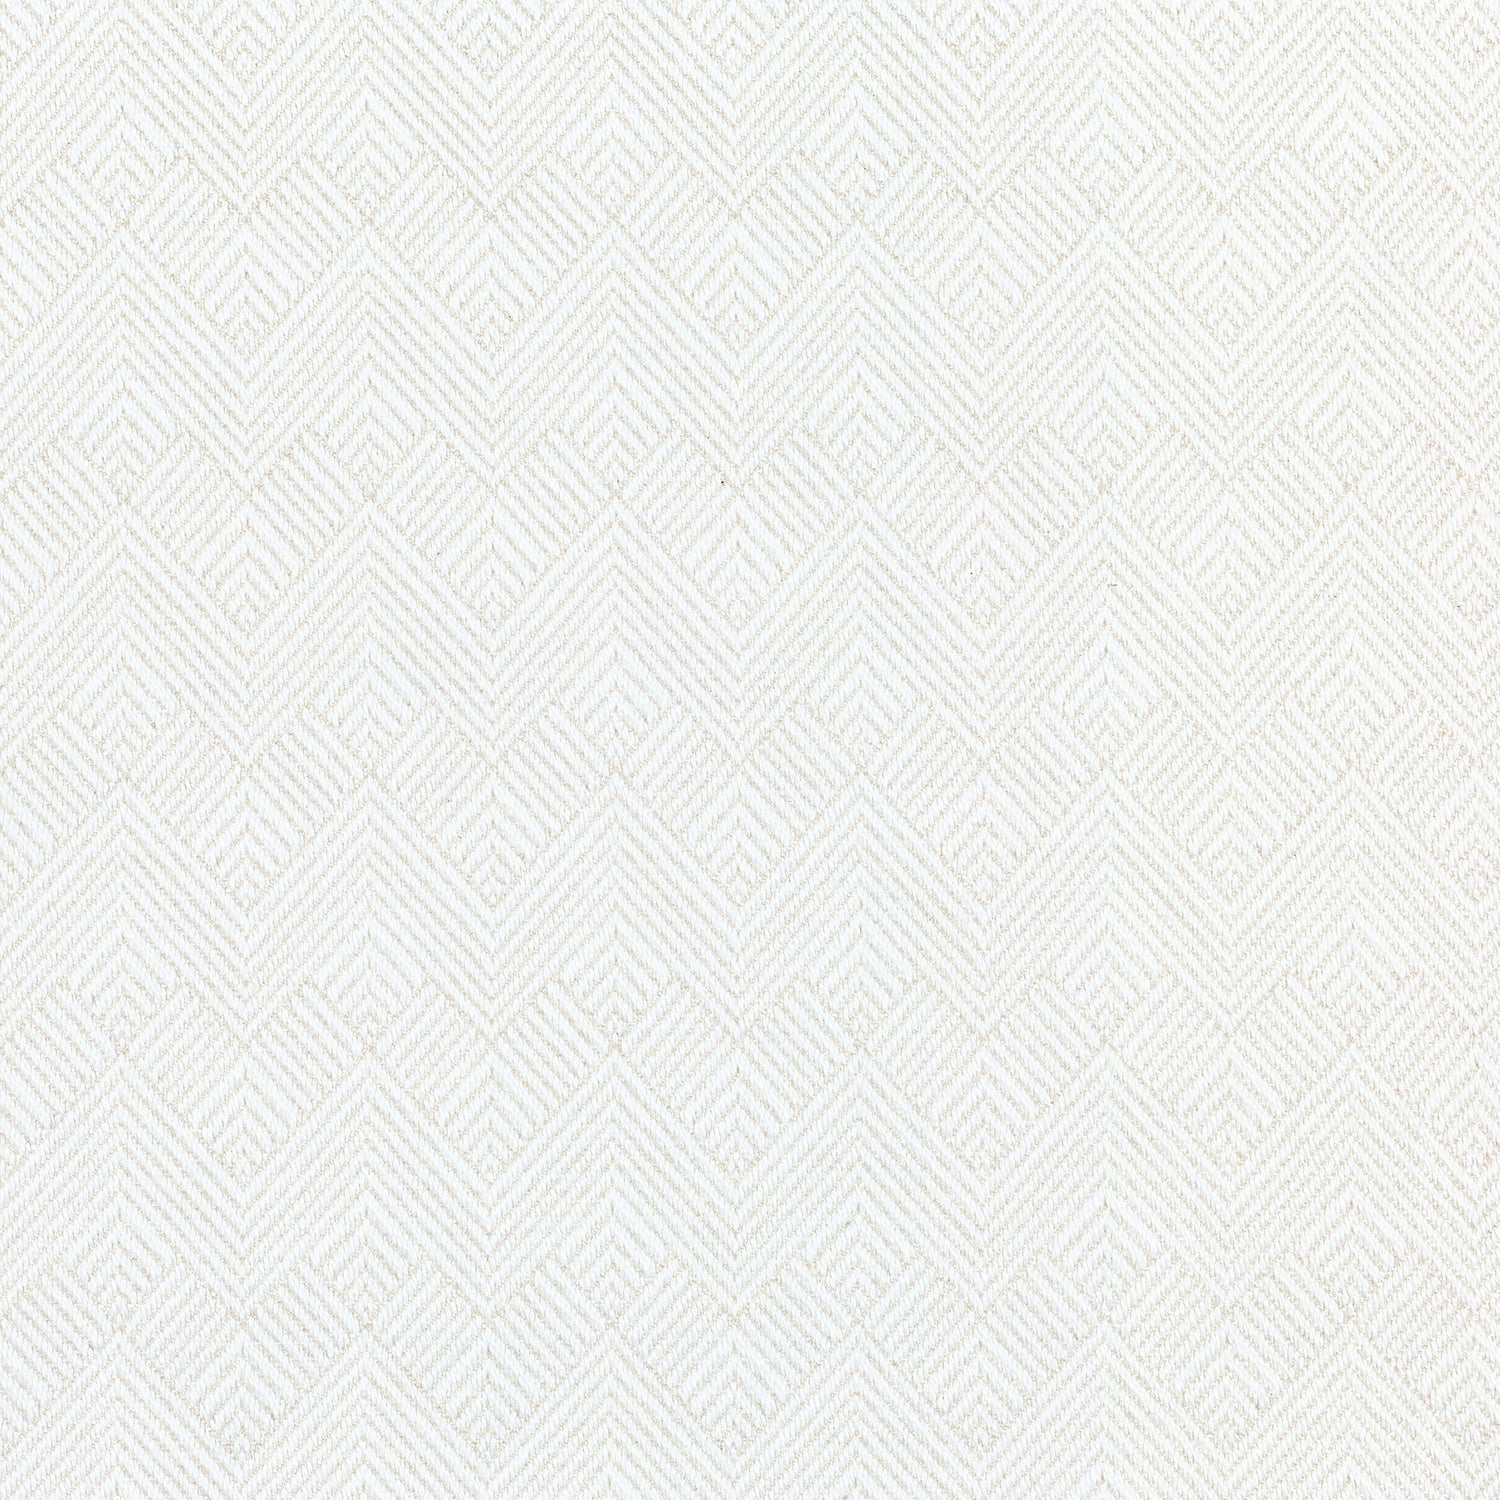 Maddox fabric in vanilla color - pattern number W73332 - by Thibaut in the Nomad collection